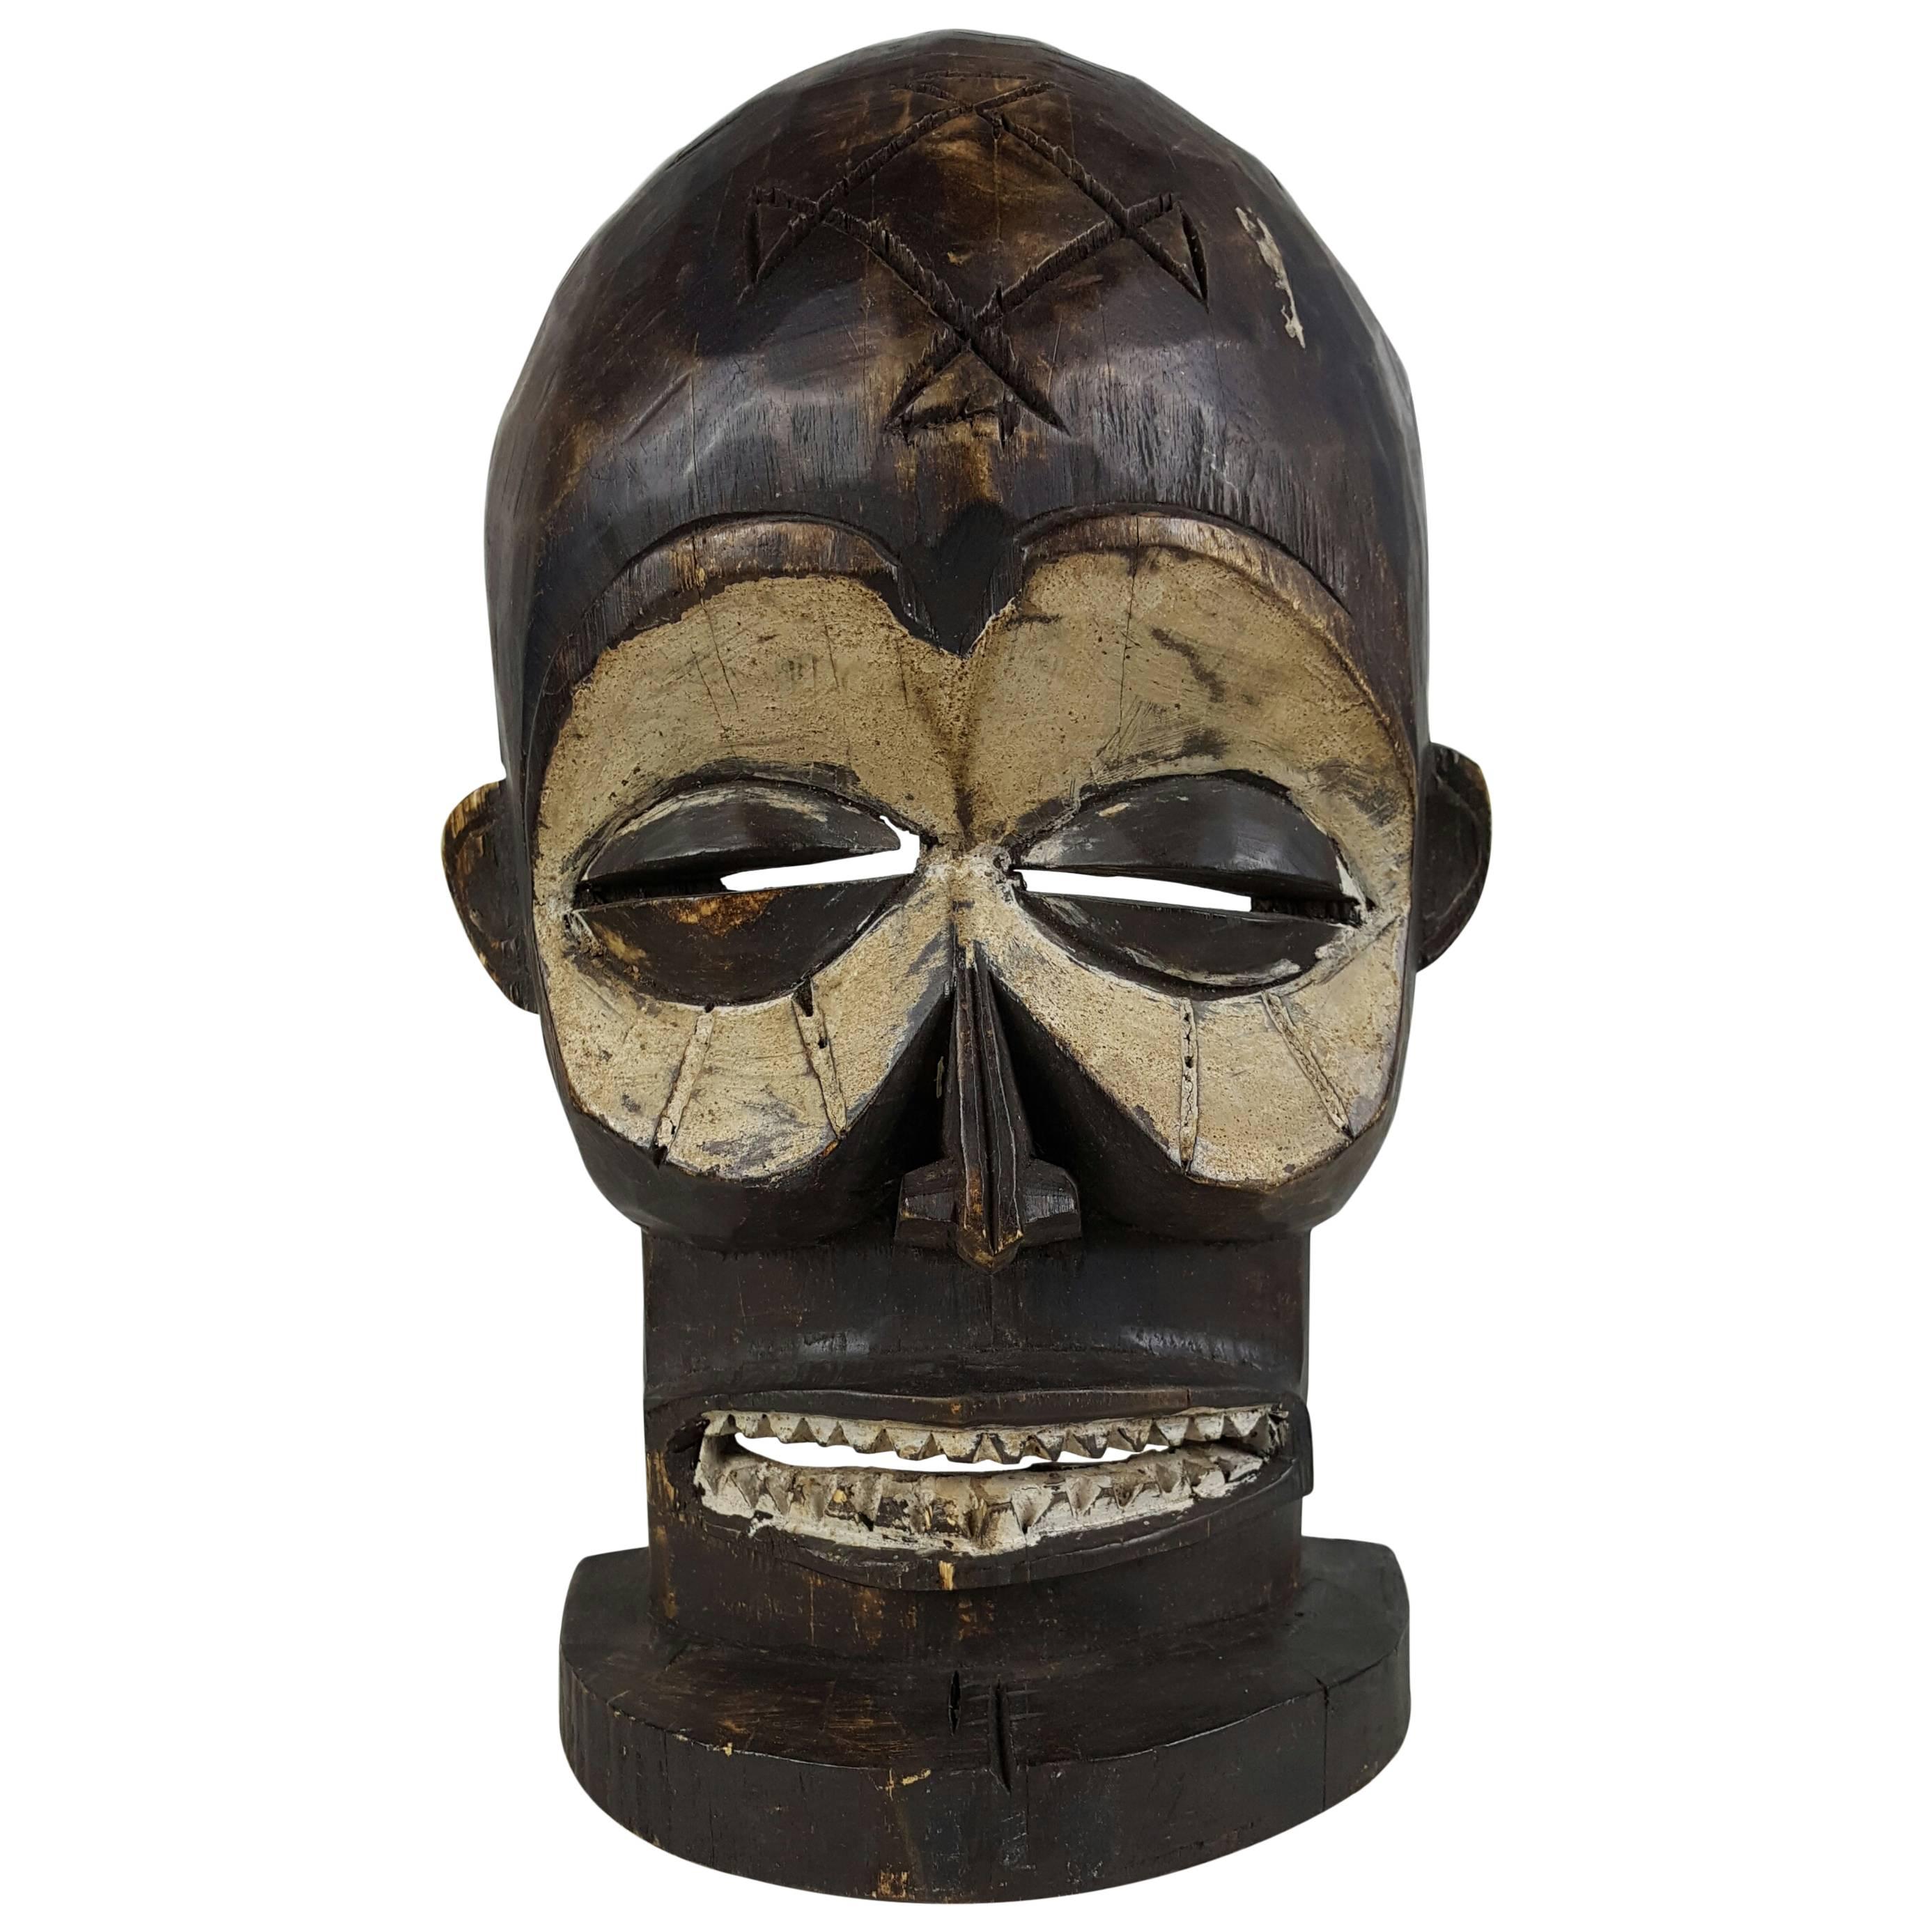 Carved Wooden Mask in the Style of Chokwe Tribal Ritual